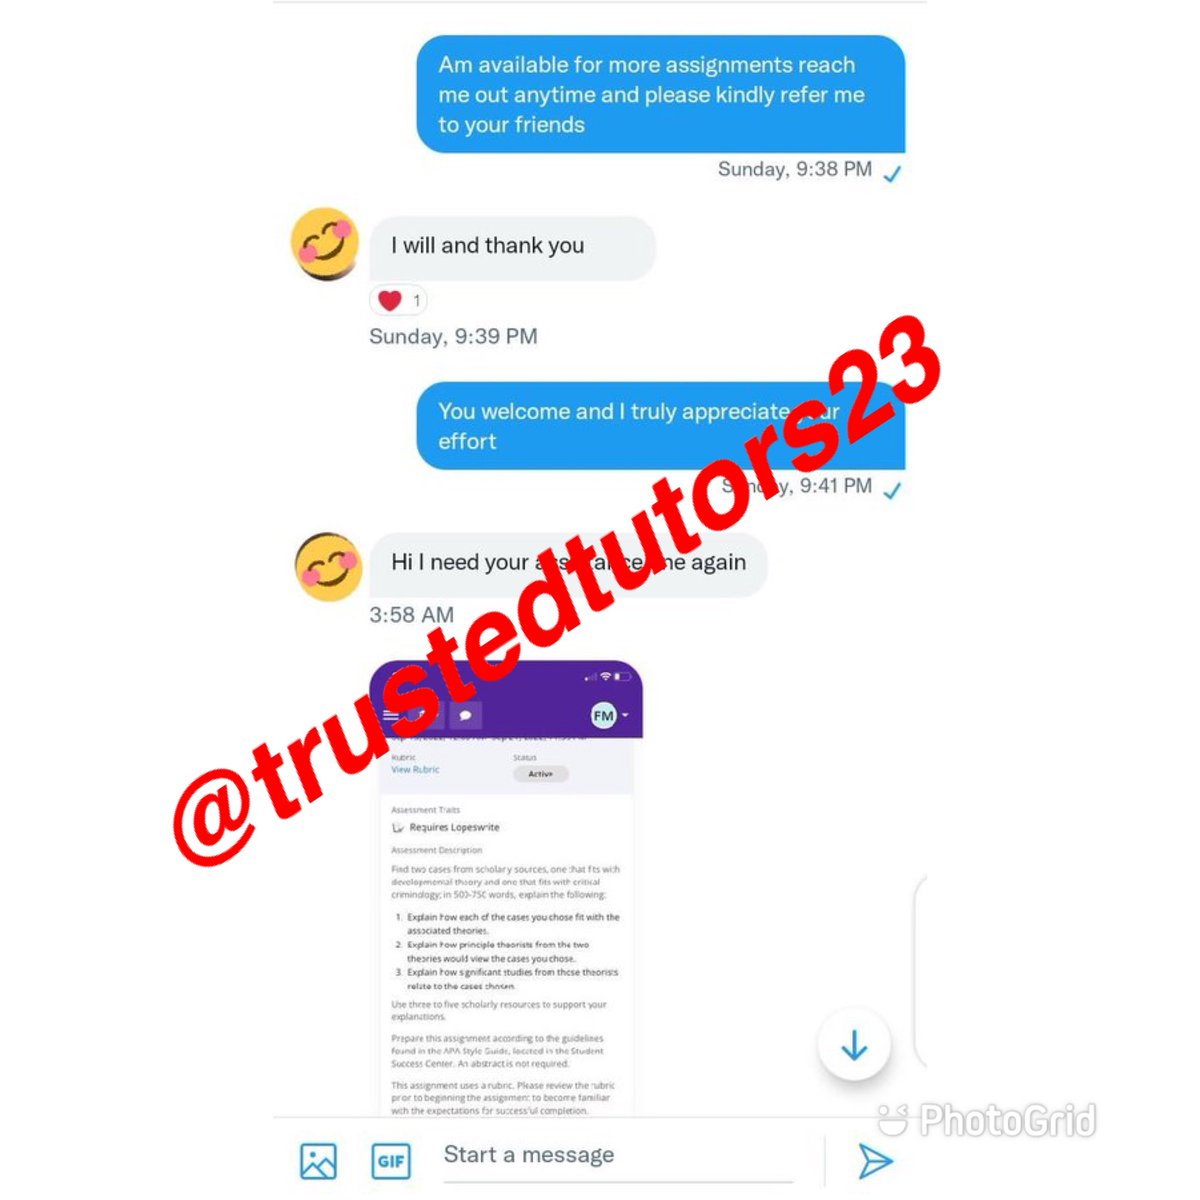 Hire our experts to generate you Quality Grades in Your Online Courses & assignments
#FoundationOfMaths
#CollegeAlgebra
#Trigonometry
#Precalculus
#Calculus,
#Statistics
#Accounting
#English,
#pay homework
#pay essay
#pay research paper
#pay assignments
Dm us for assistance.